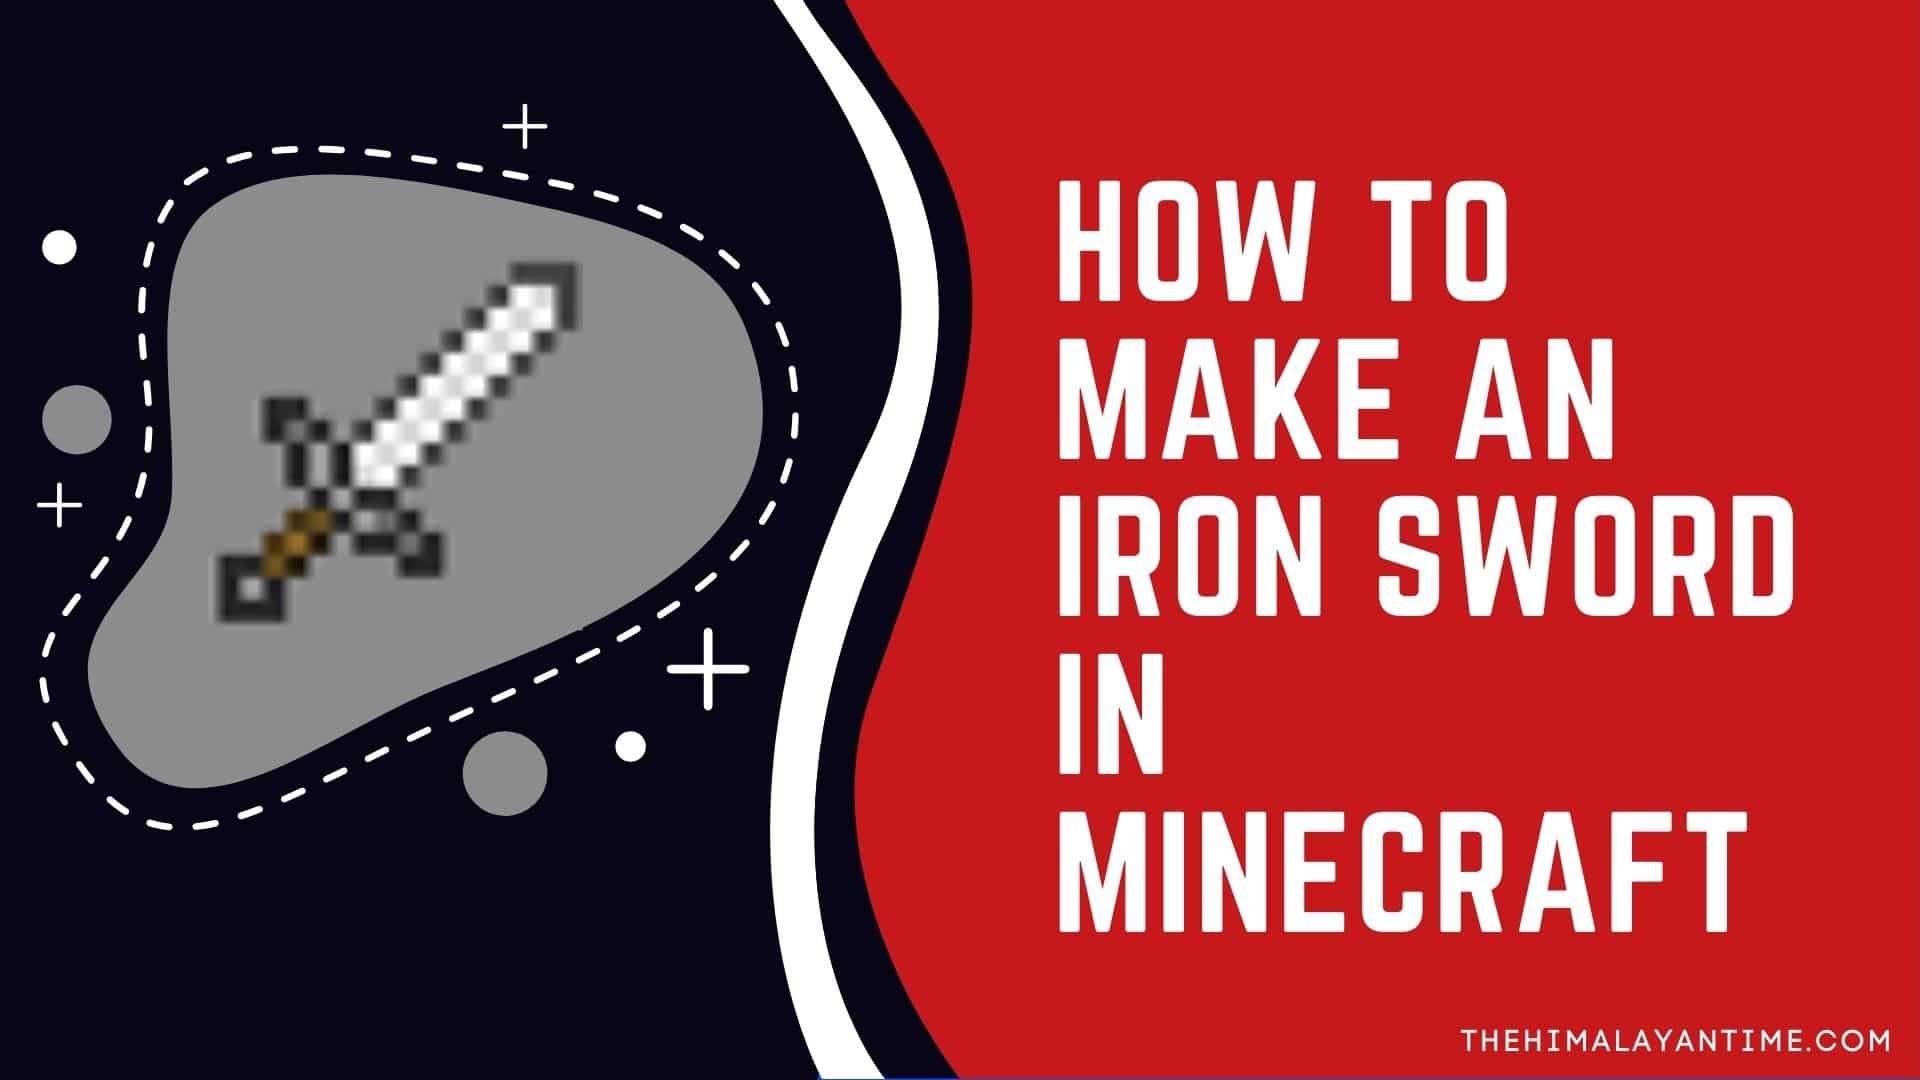 how to craft an iron sword,How to make an Iron Sword in Minecraft